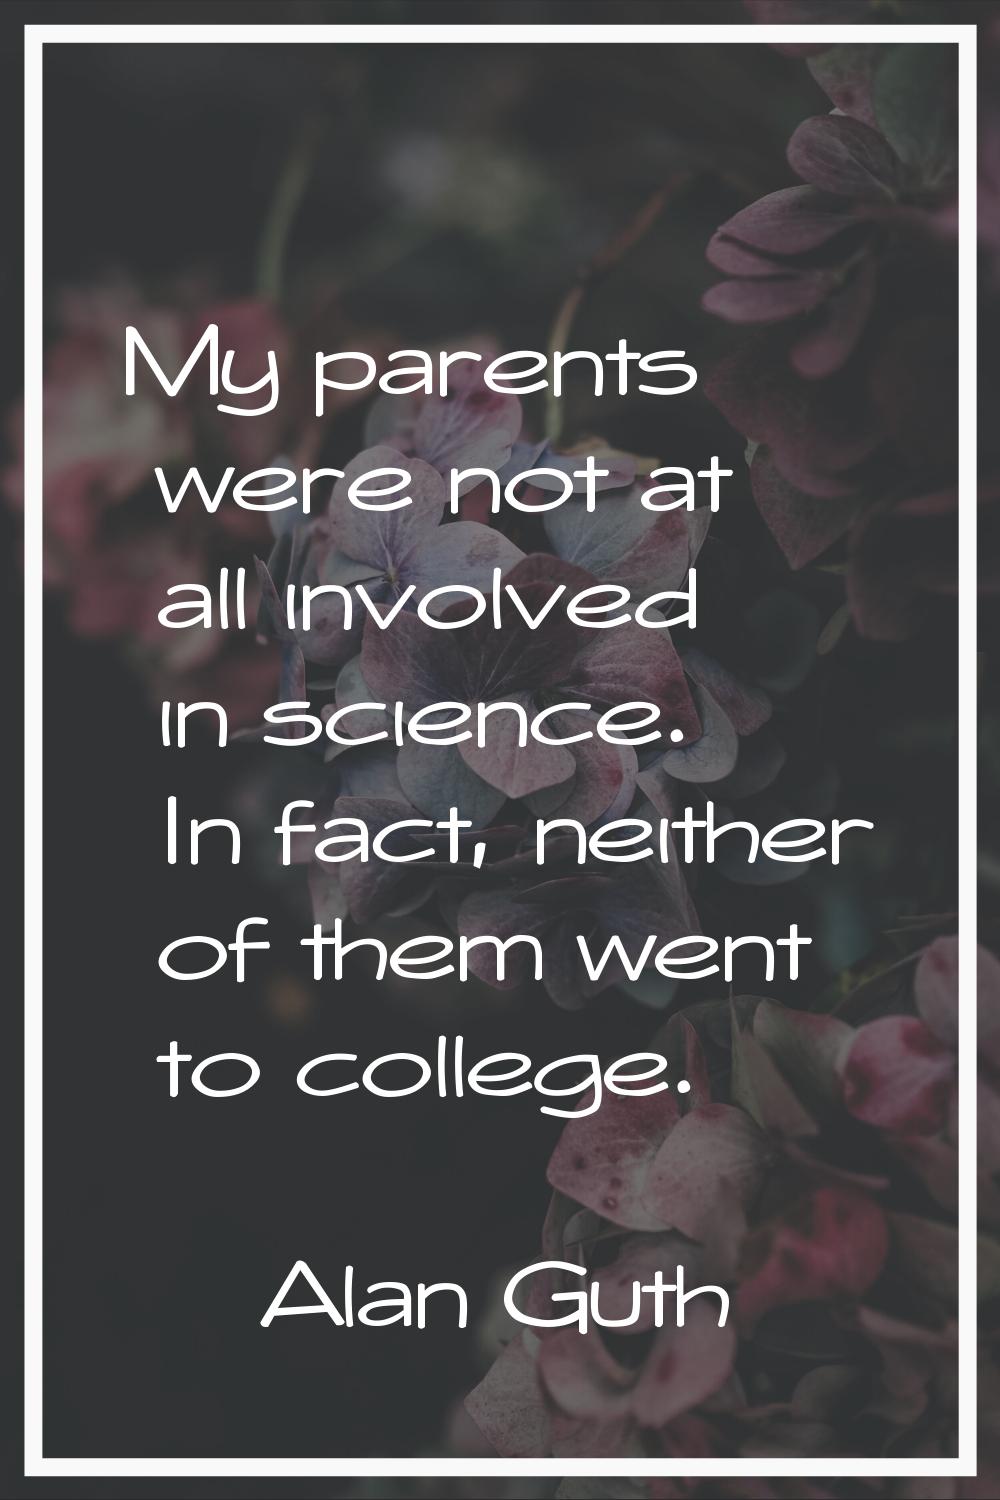 My parents were not at all involved in science. In fact, neither of them went to college.